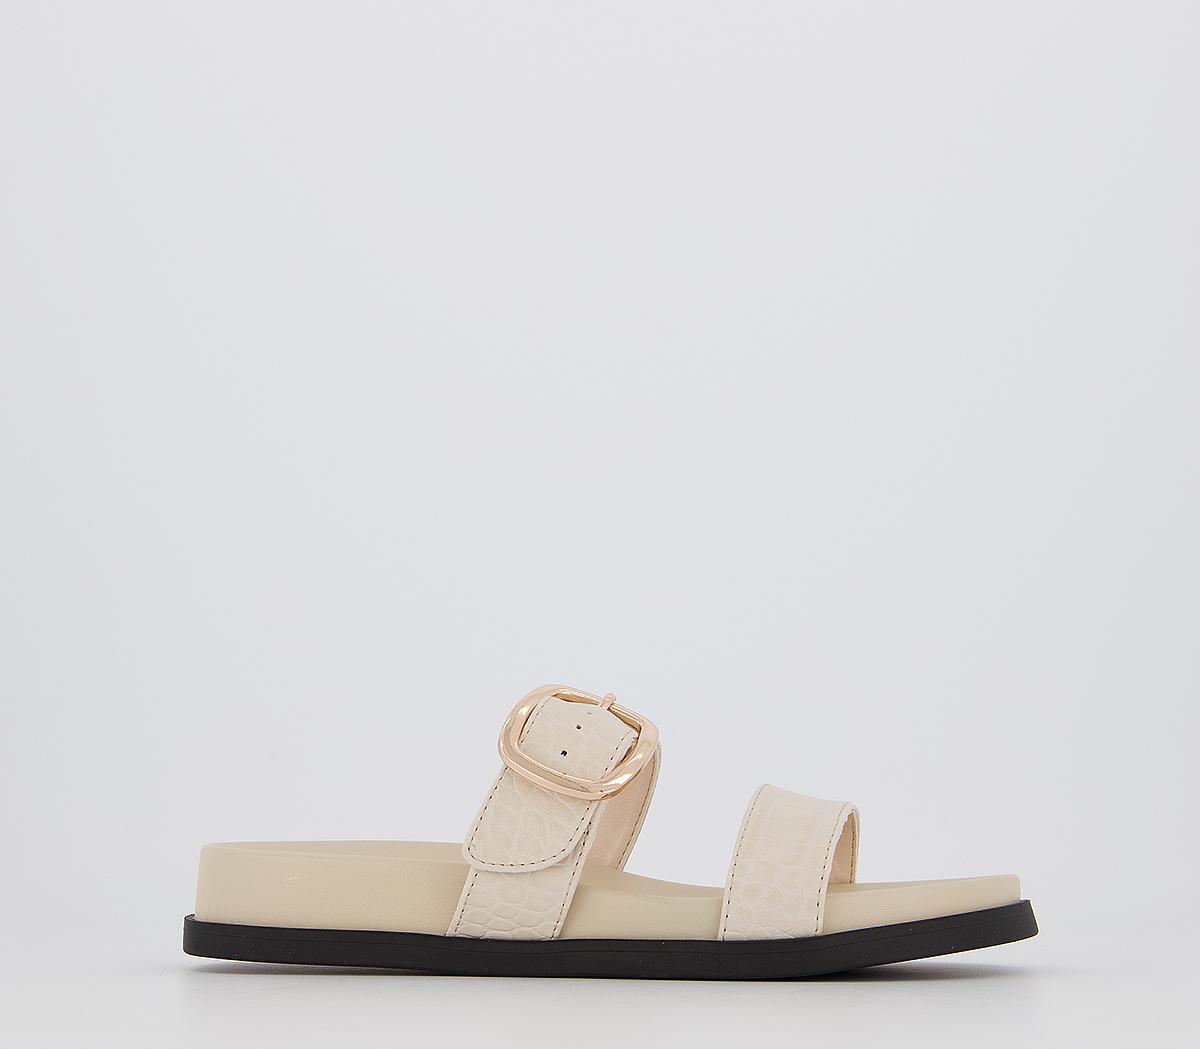 OFFICESynthia Footbed SandalsOff White Croc